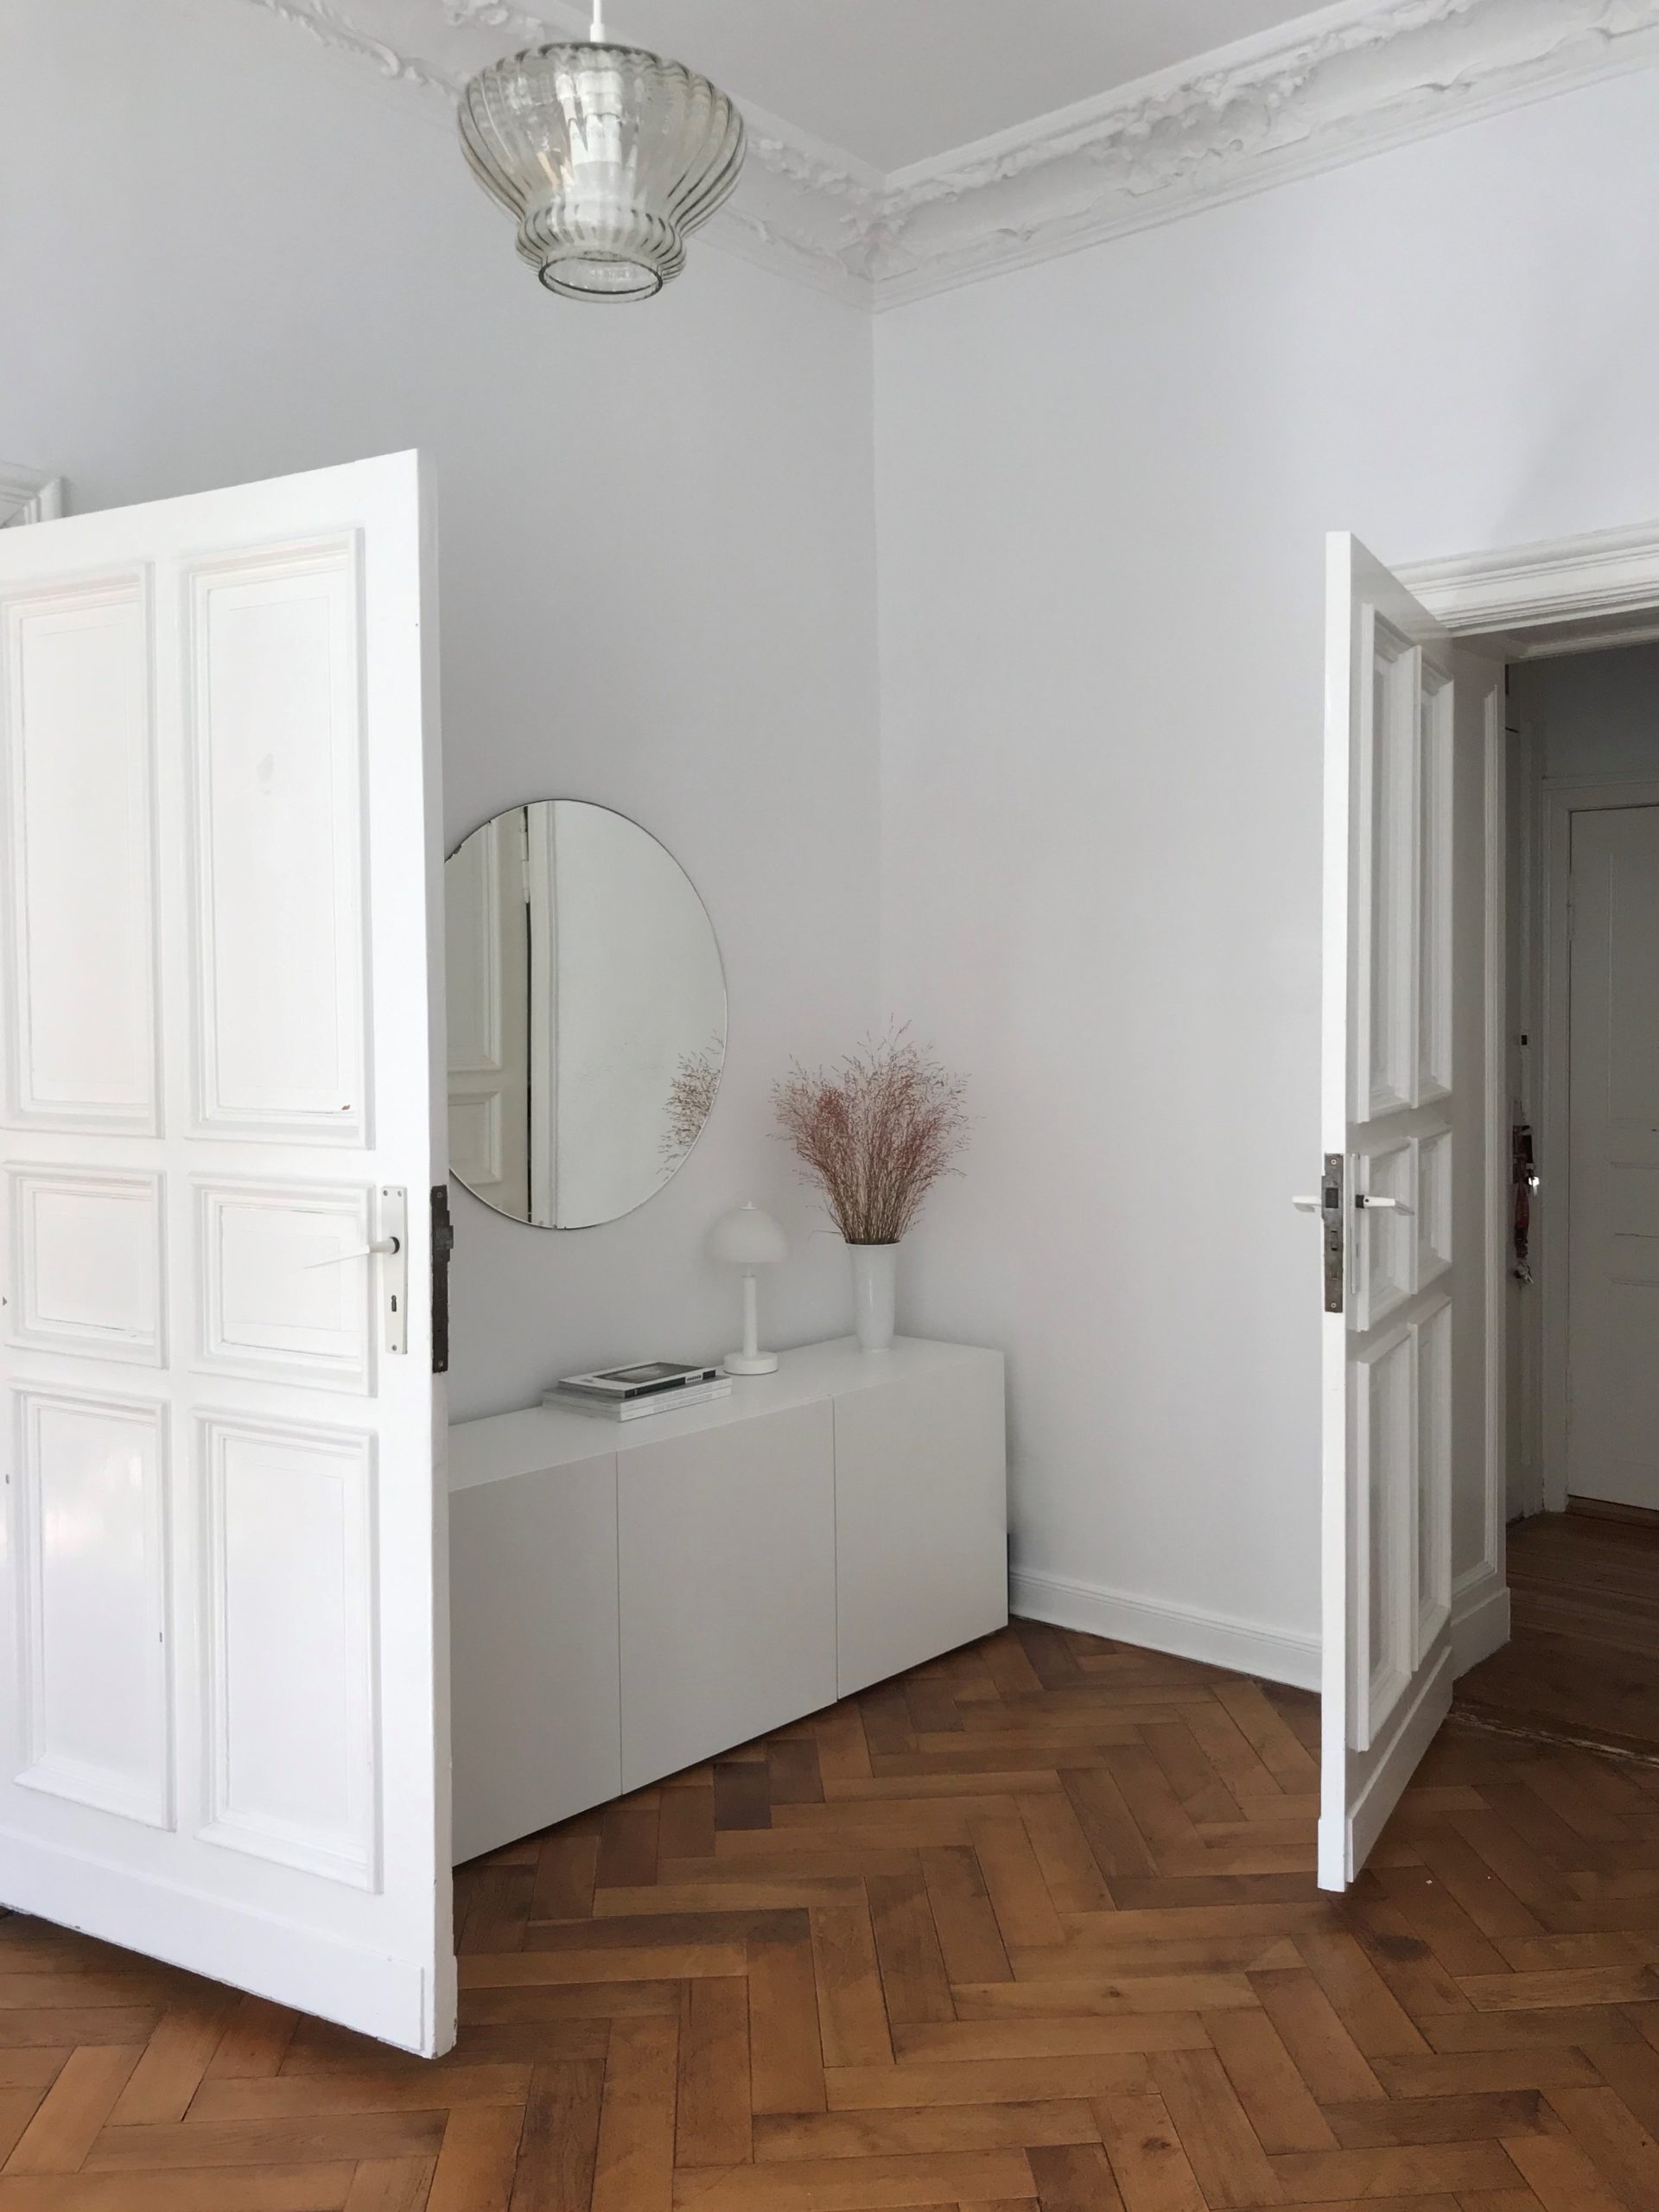 White interior design inspo, slow living, scandinavian style, round mirror, high ceilings, wood floors, simple styling, Berlin | RG Daily Blog